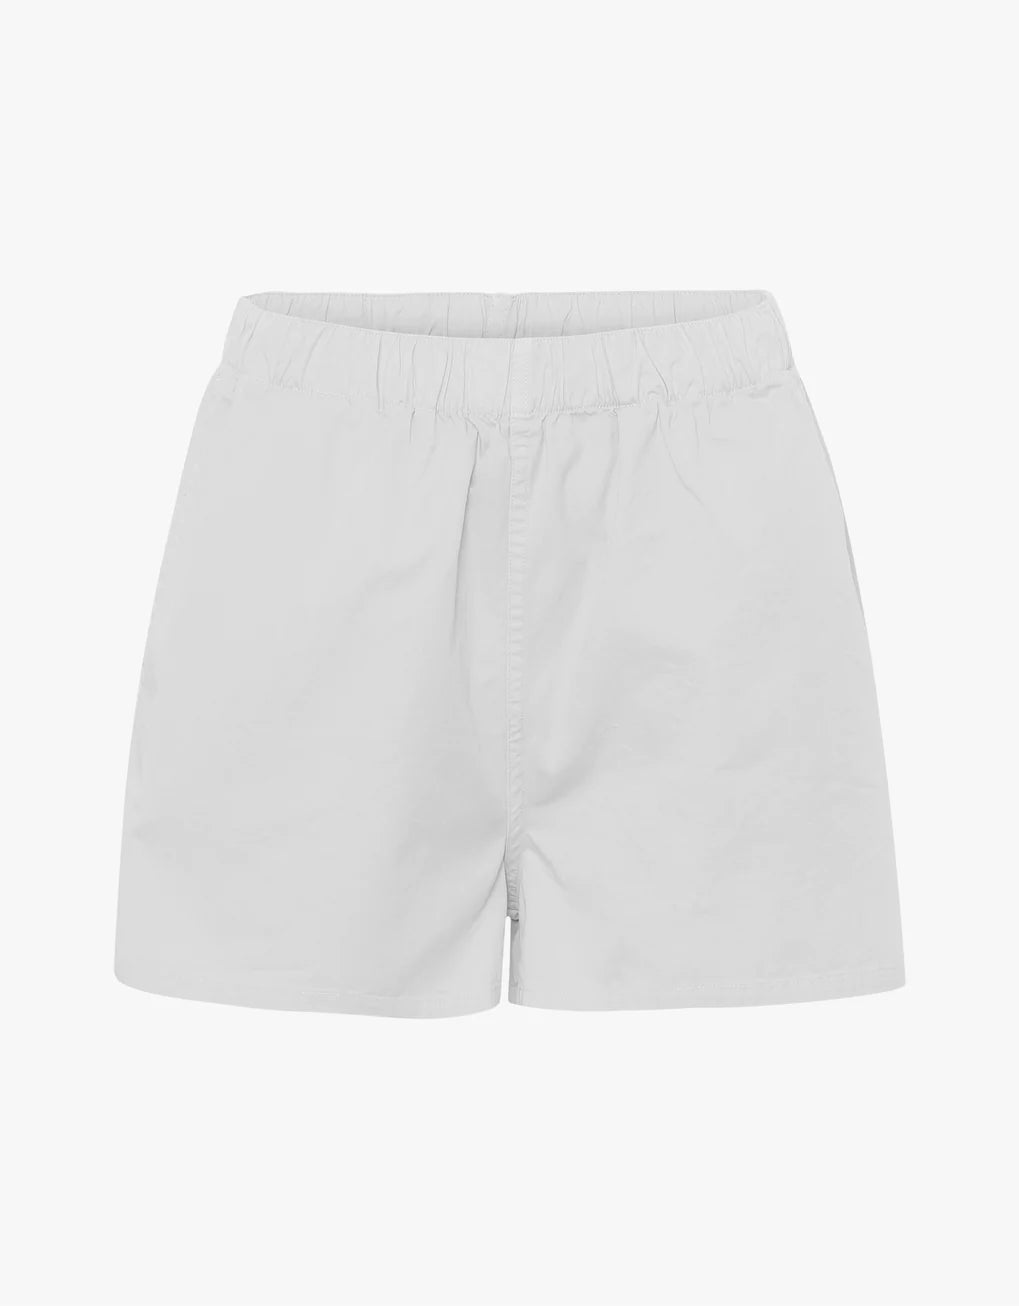 Durable, white Colorful Standard Organic Twill Shorts on a plain background.